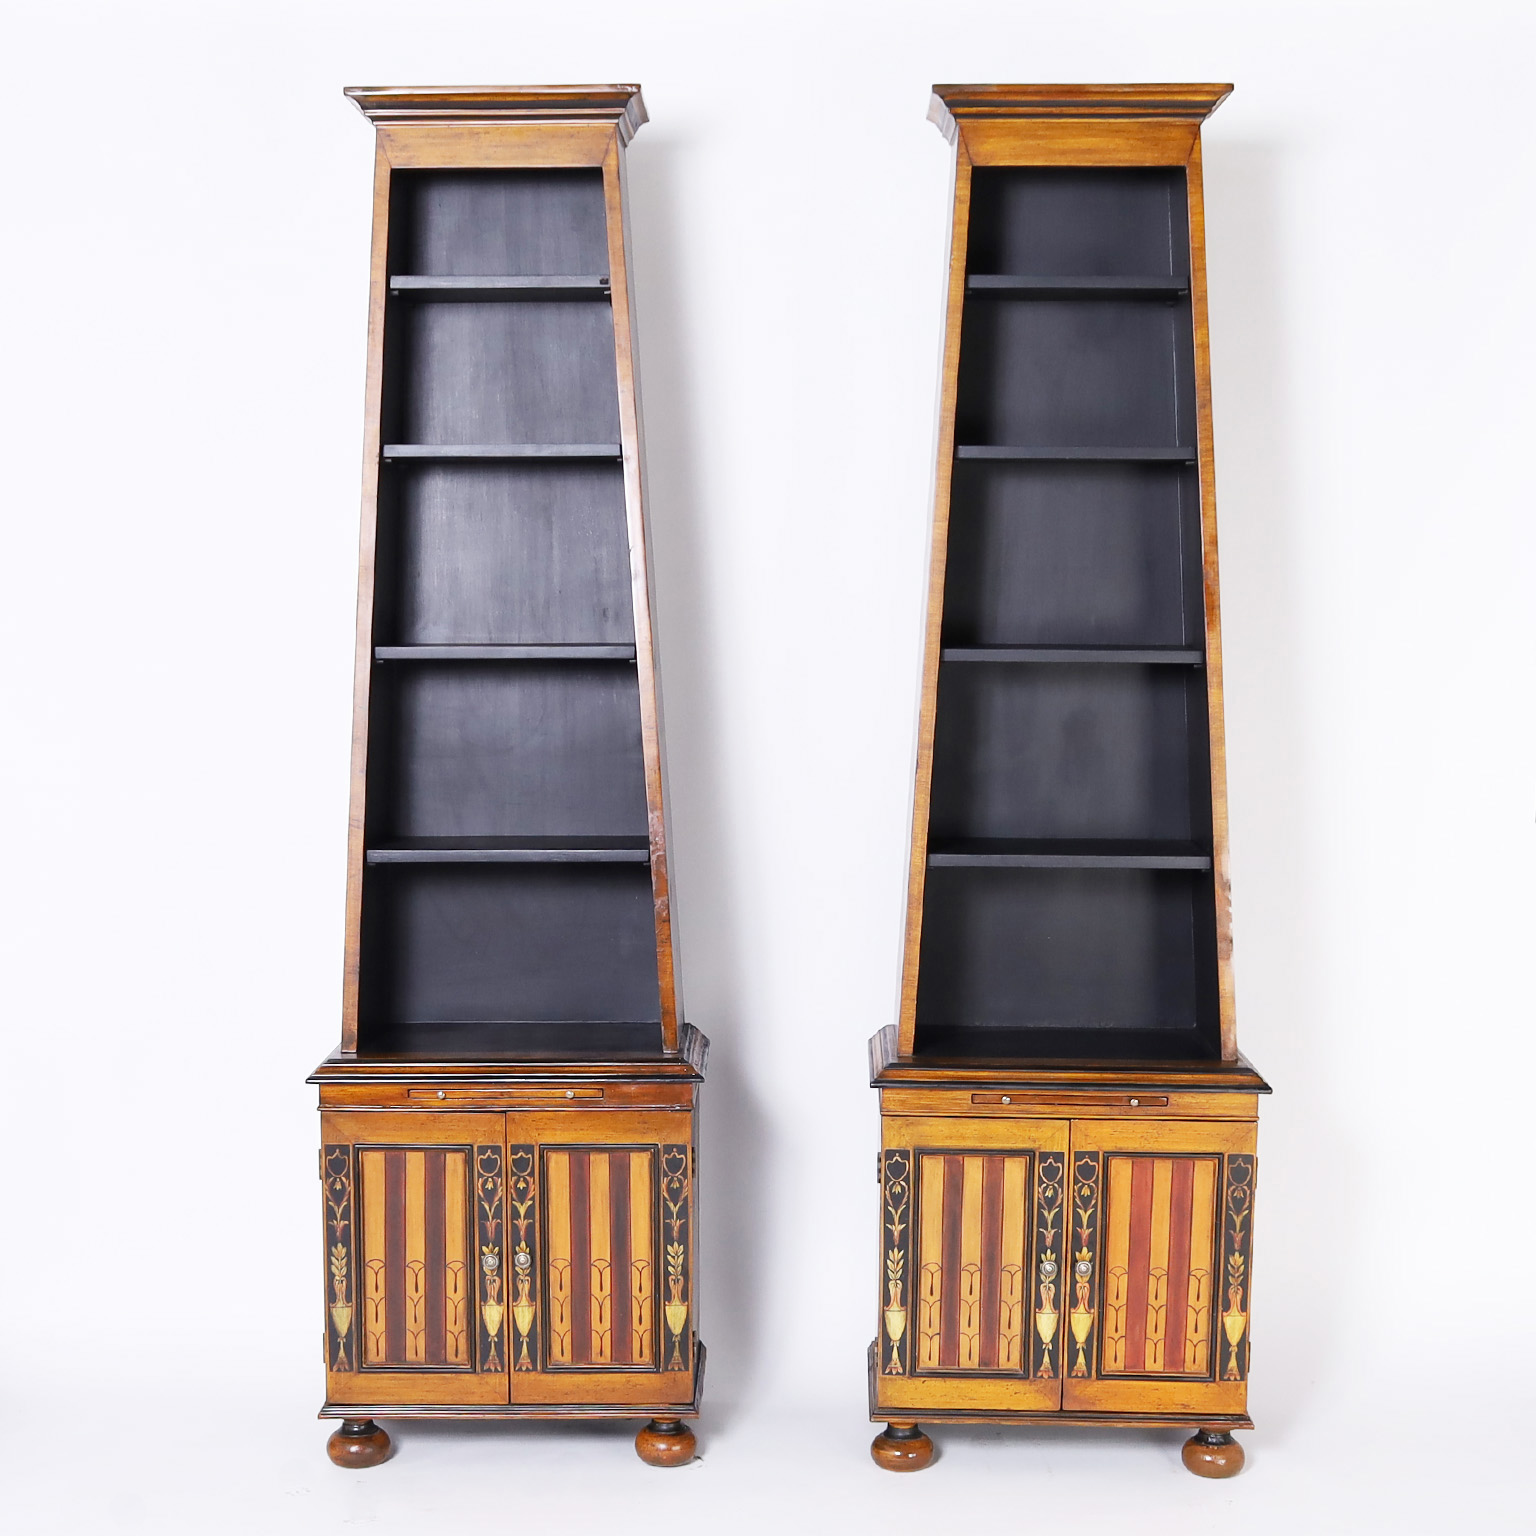 Pair of Adam Style Painted Bookcases or Etageres